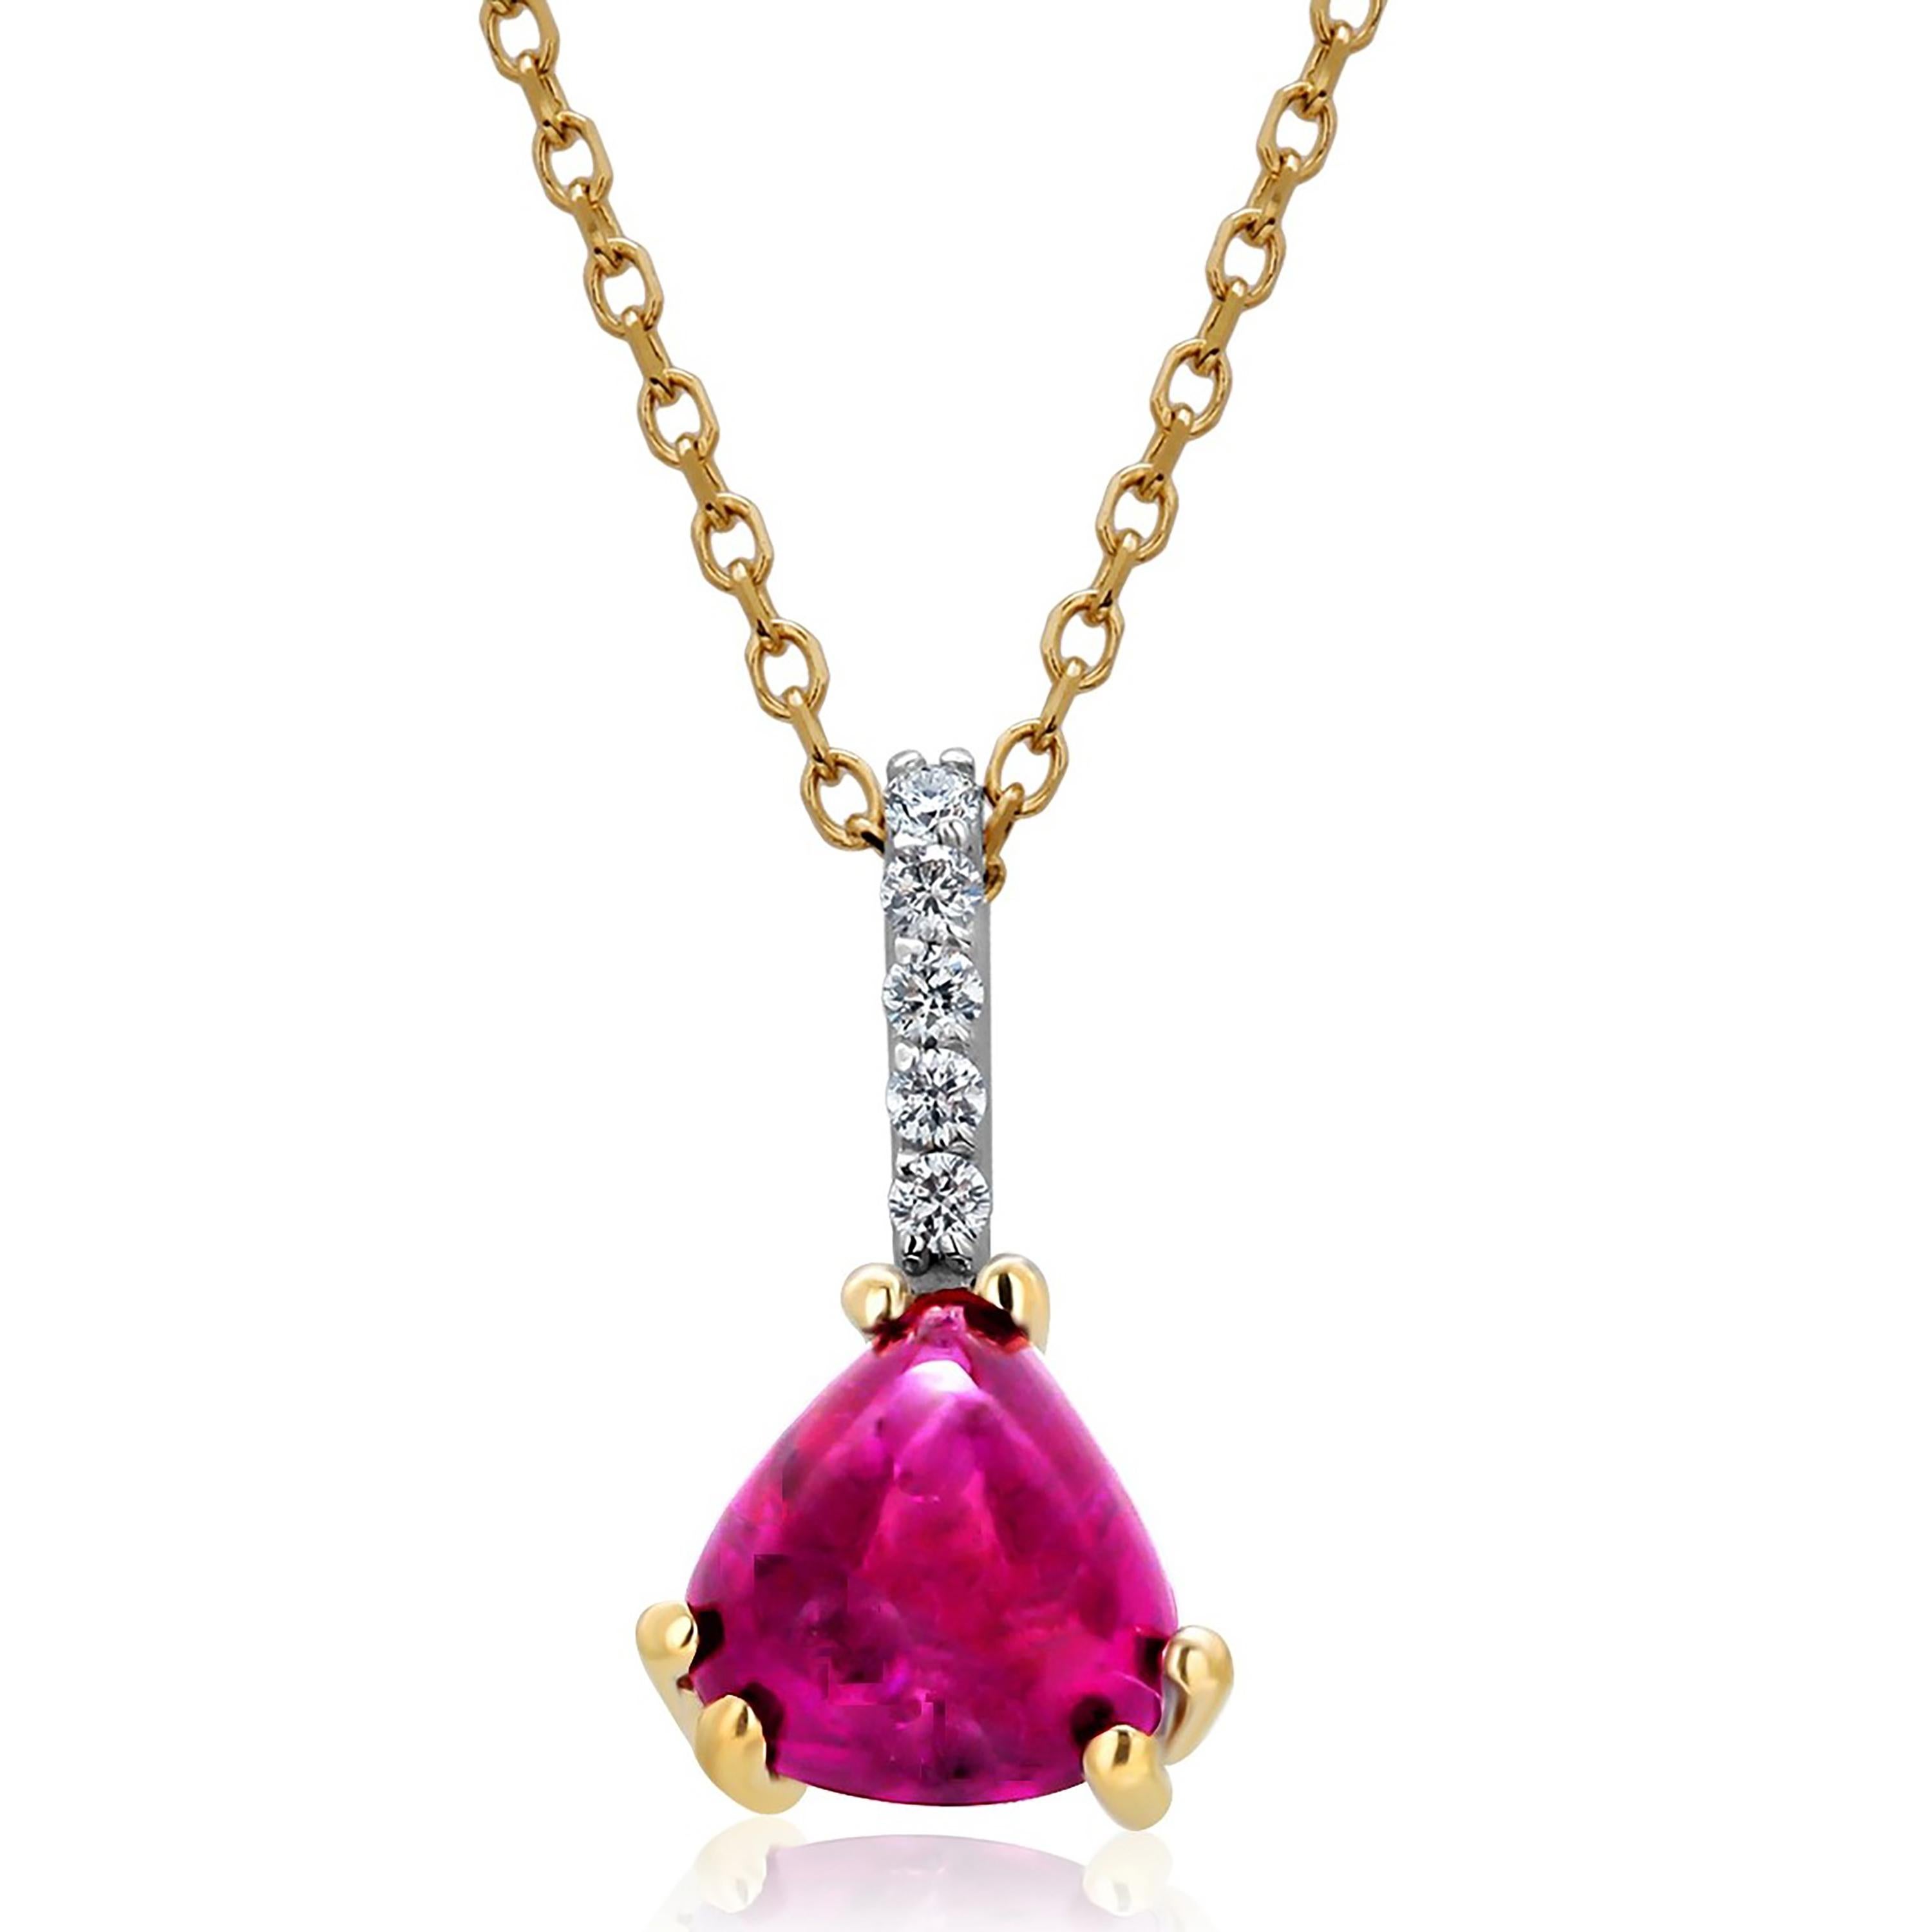 Contemporary Pear Shaped Cabochon Burma Ruby and Diamond Bail Drop Gold Necklace Pendant 